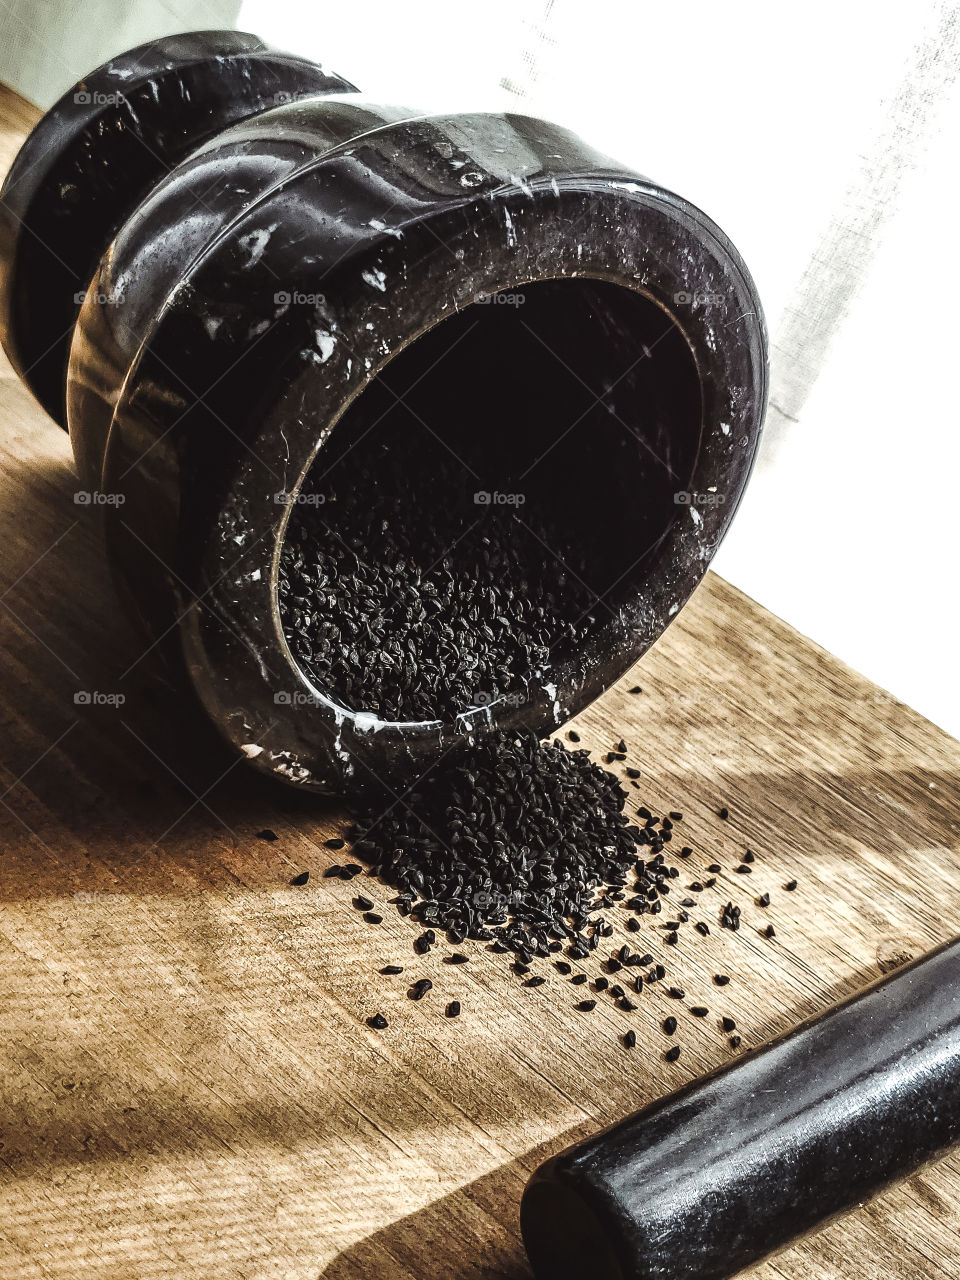 A black stone mortar tipped over with medicinal black seeds nigella sativa falling out onto the wood surface that is also illuminated by sunlight peering through the window and casting shadows on to the wood surface.